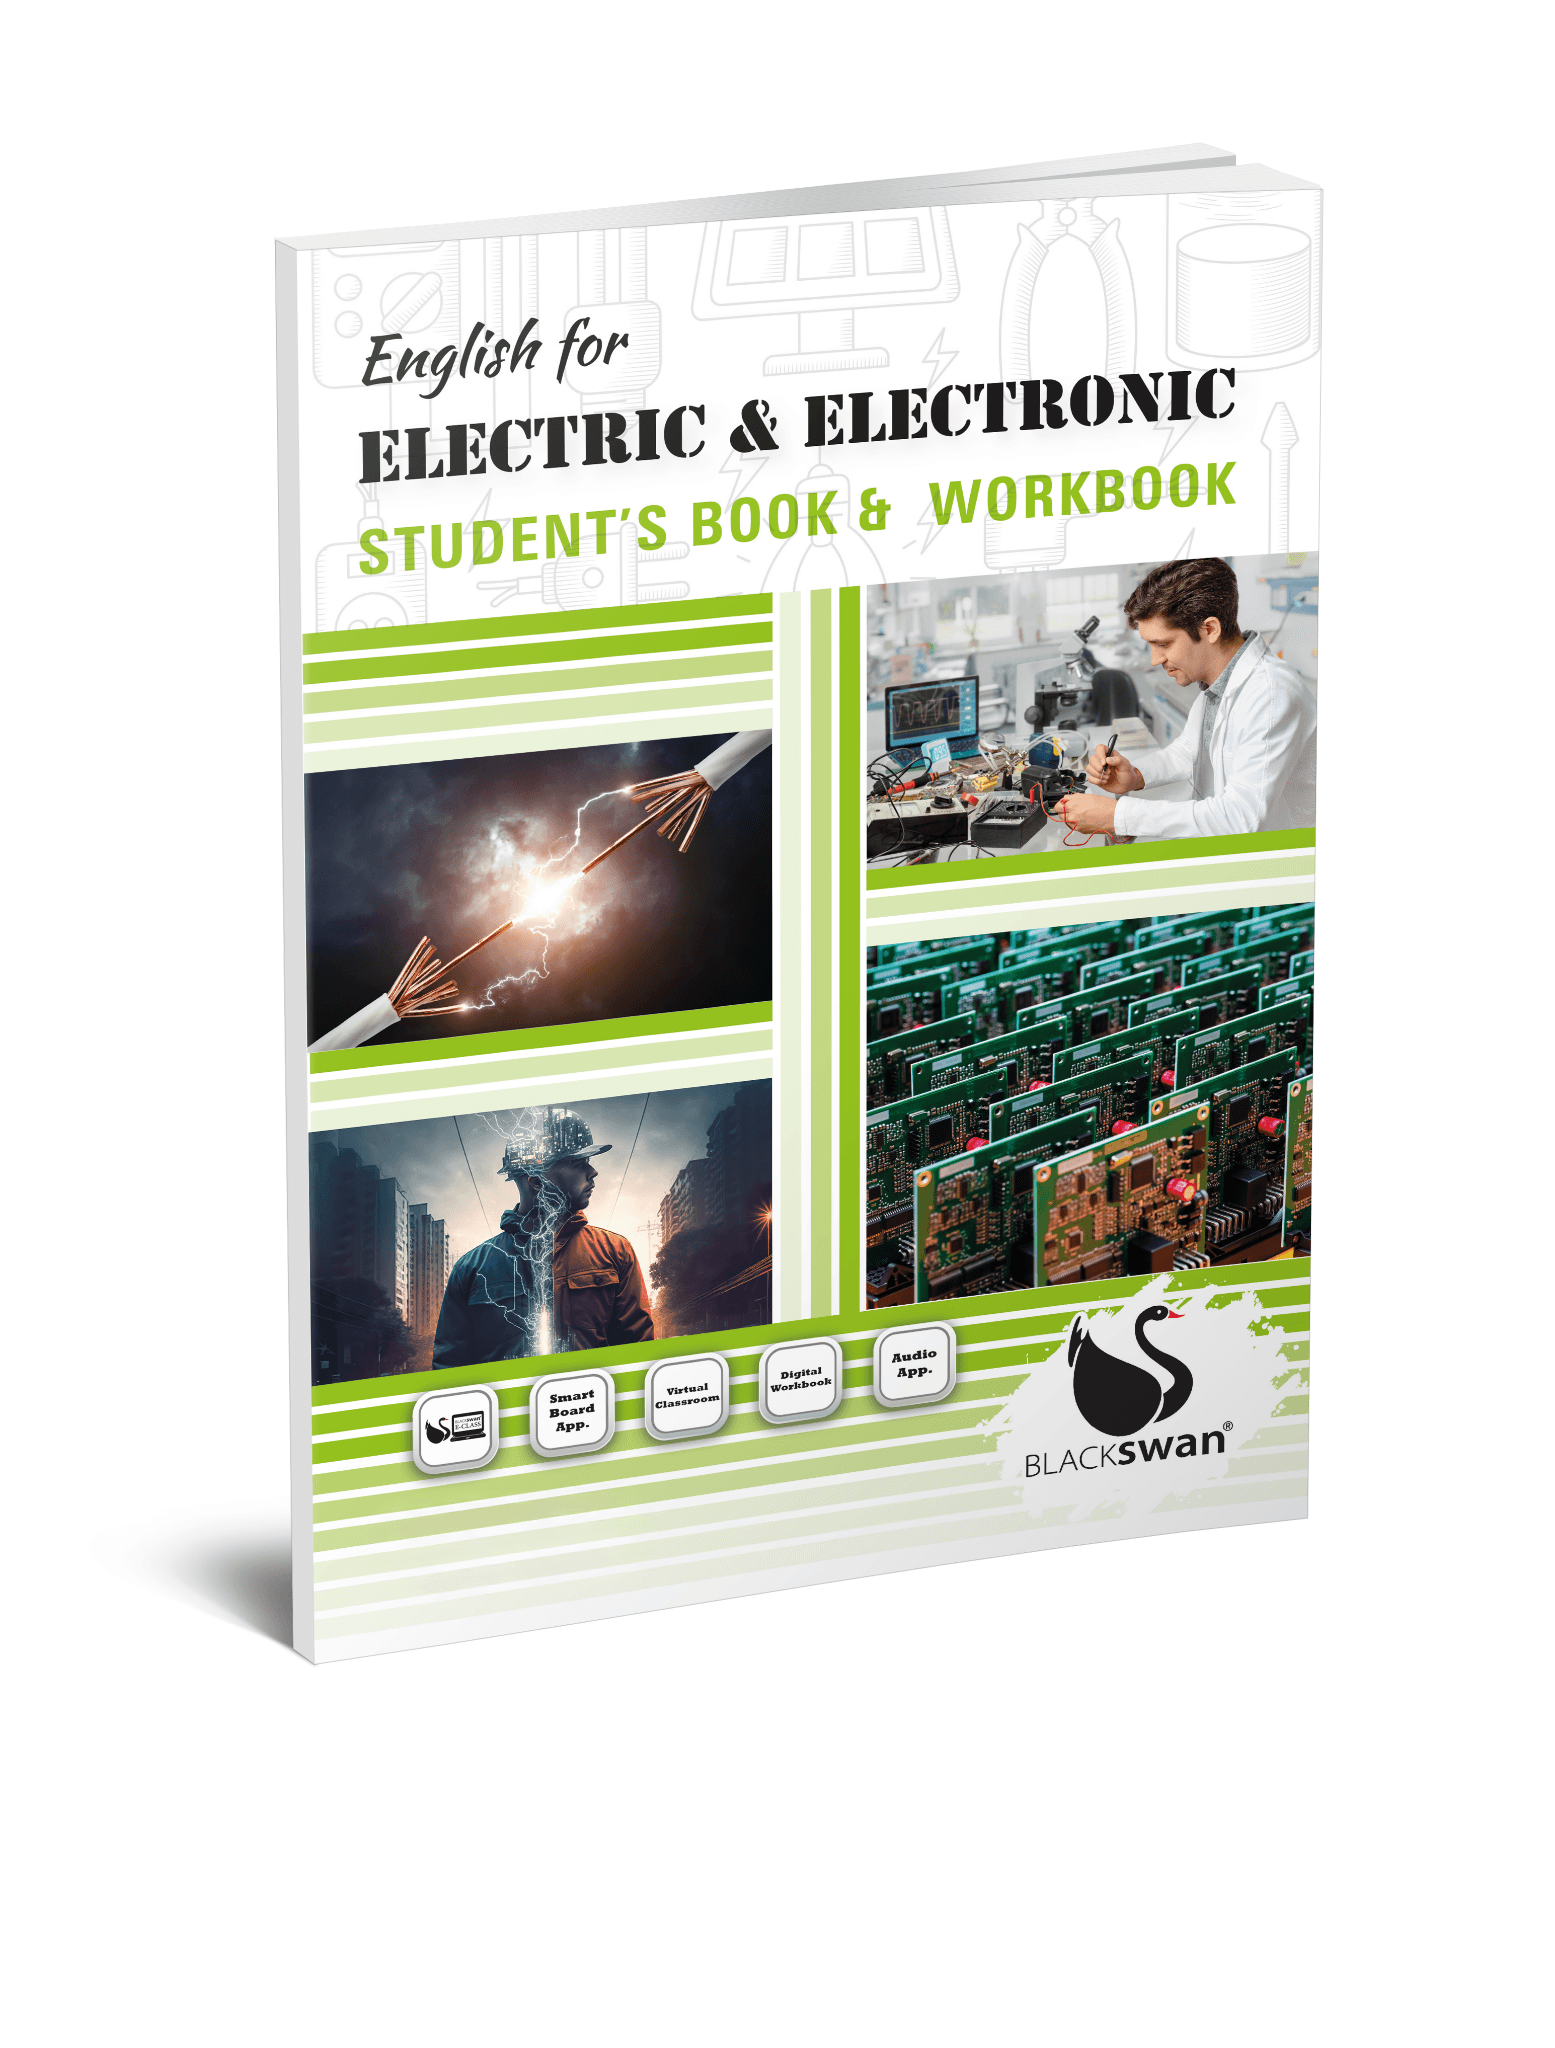 English for Electric and Electronic Student's Book & Workbook